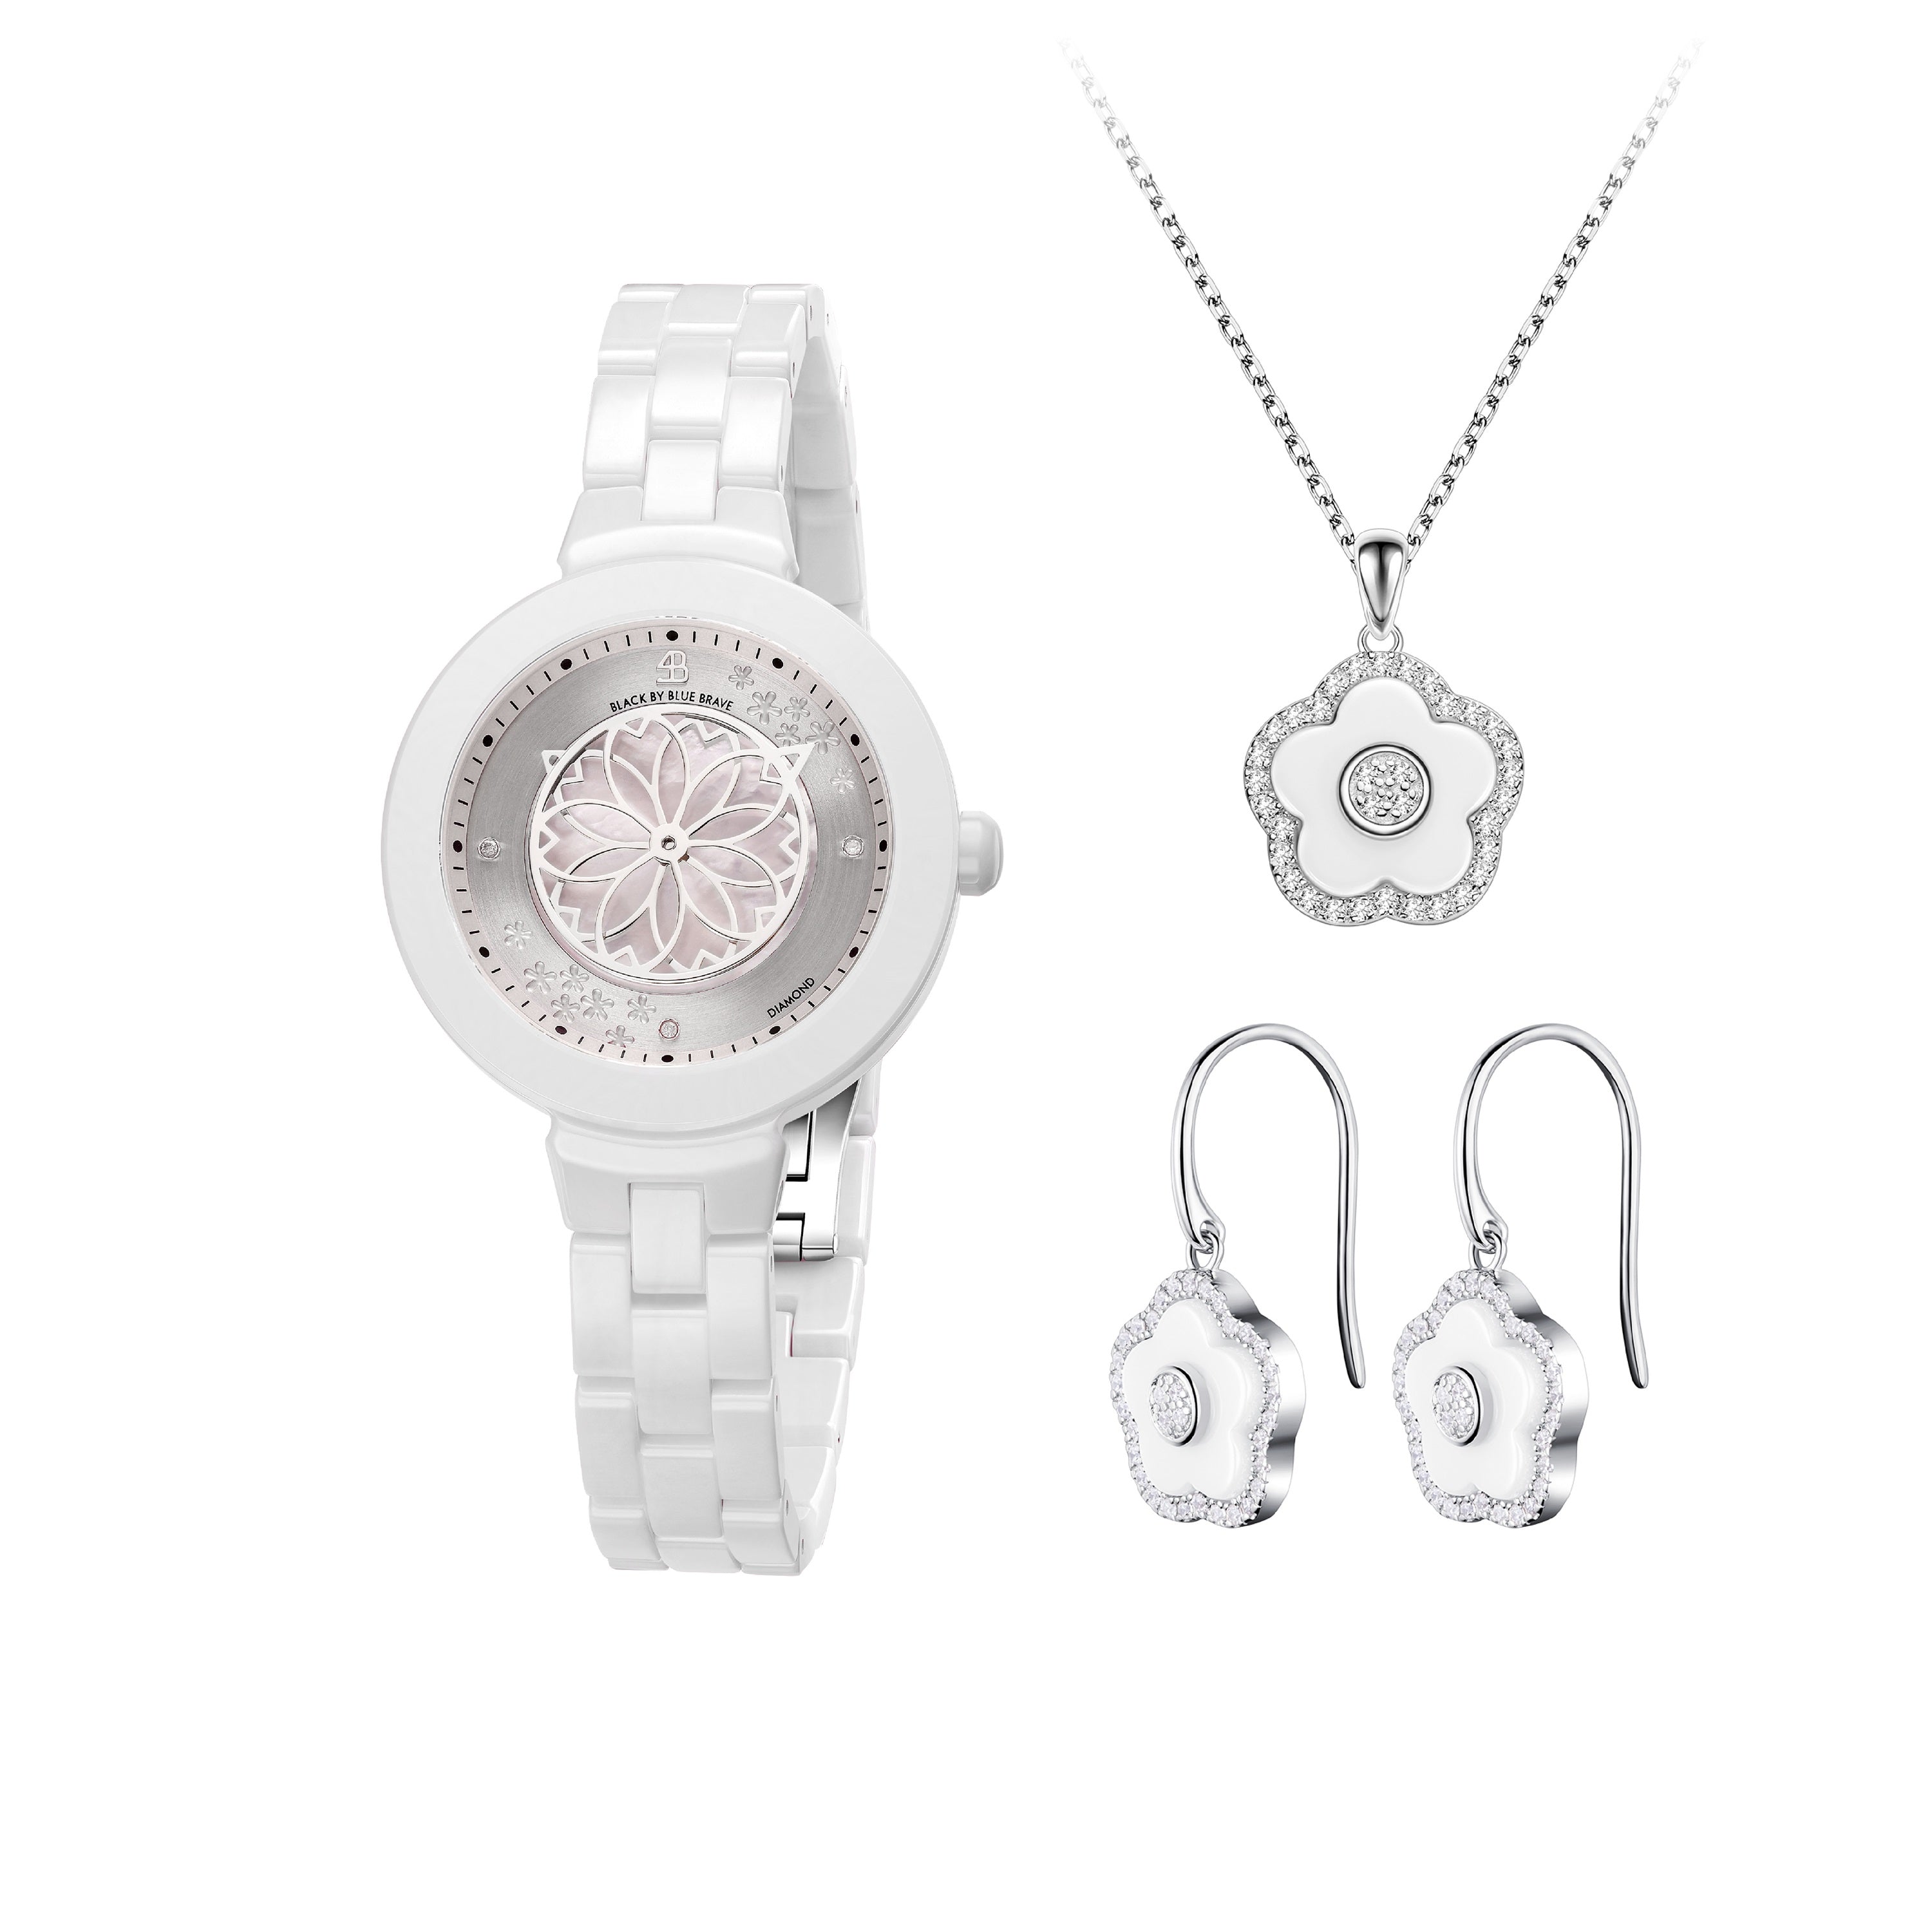 White Diamond Cherry Blossom Ceramic Watch With Flower Ceramic Jewelleries（Earrings & Necklace）